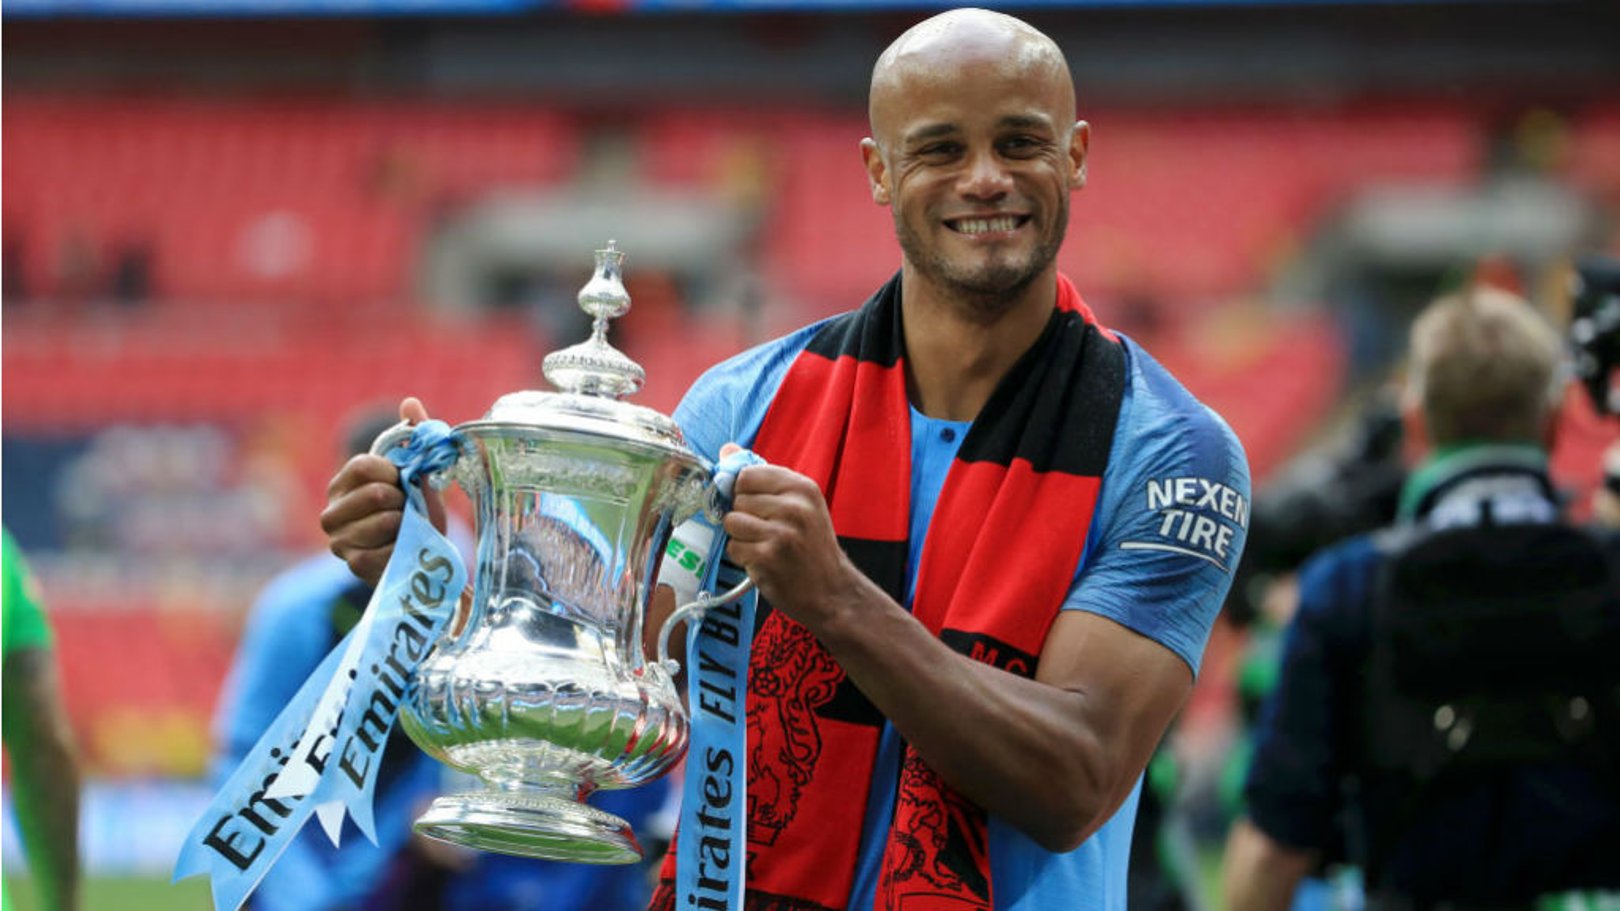 LEGENDARY FIGURE: Vincent Kompany is to leave Manchester City after an incredible, success-laden 11-year spell with the Club